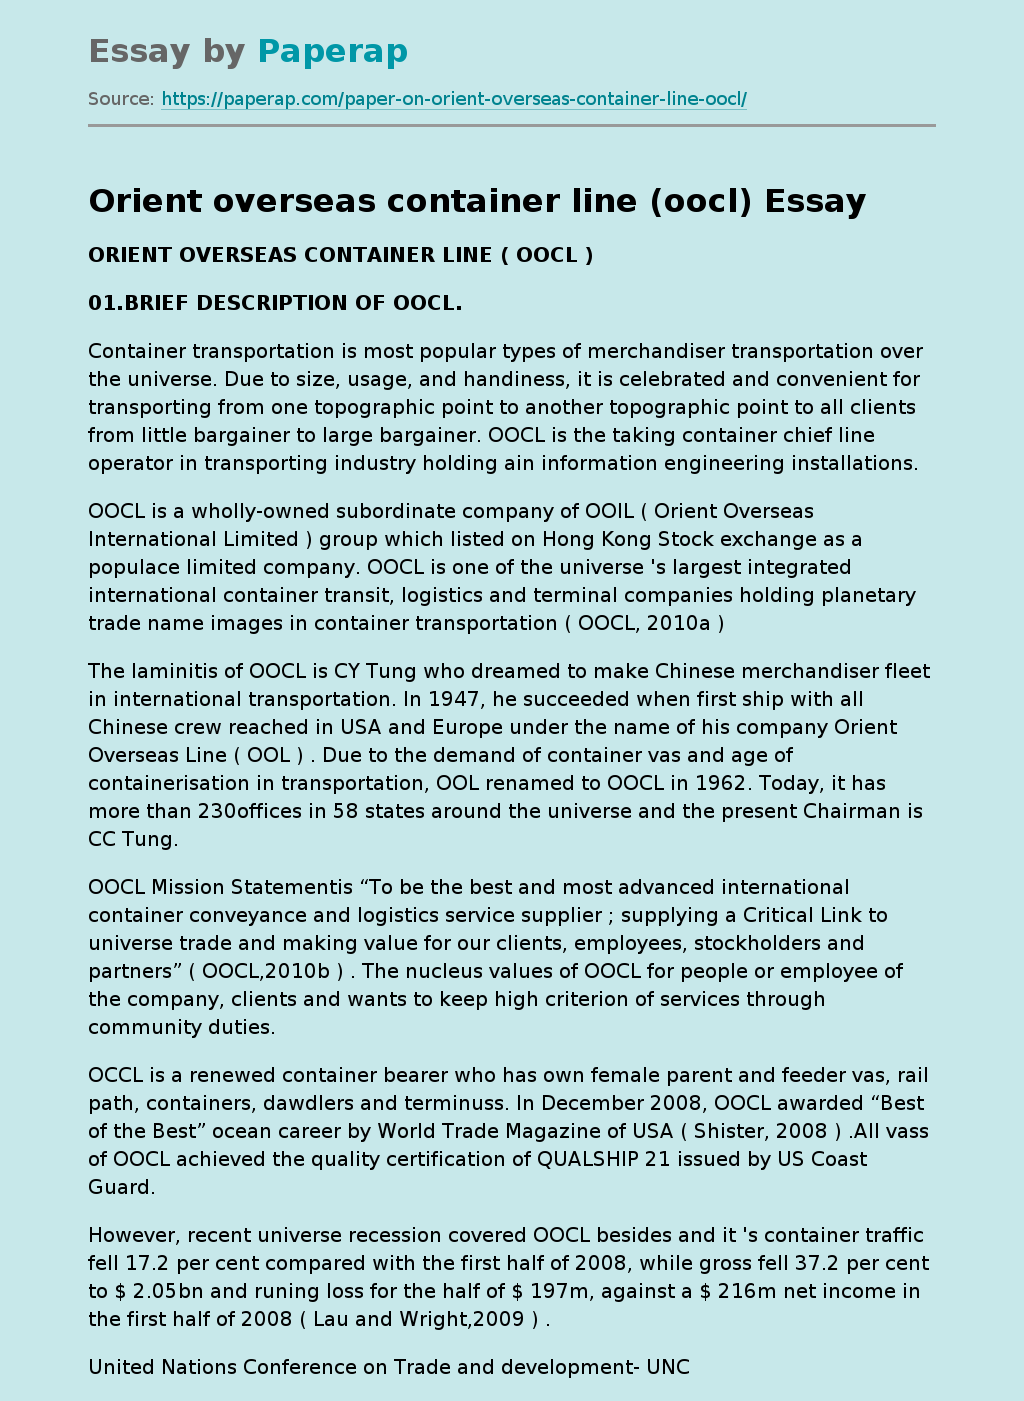 Orient overseas container line (oocl)